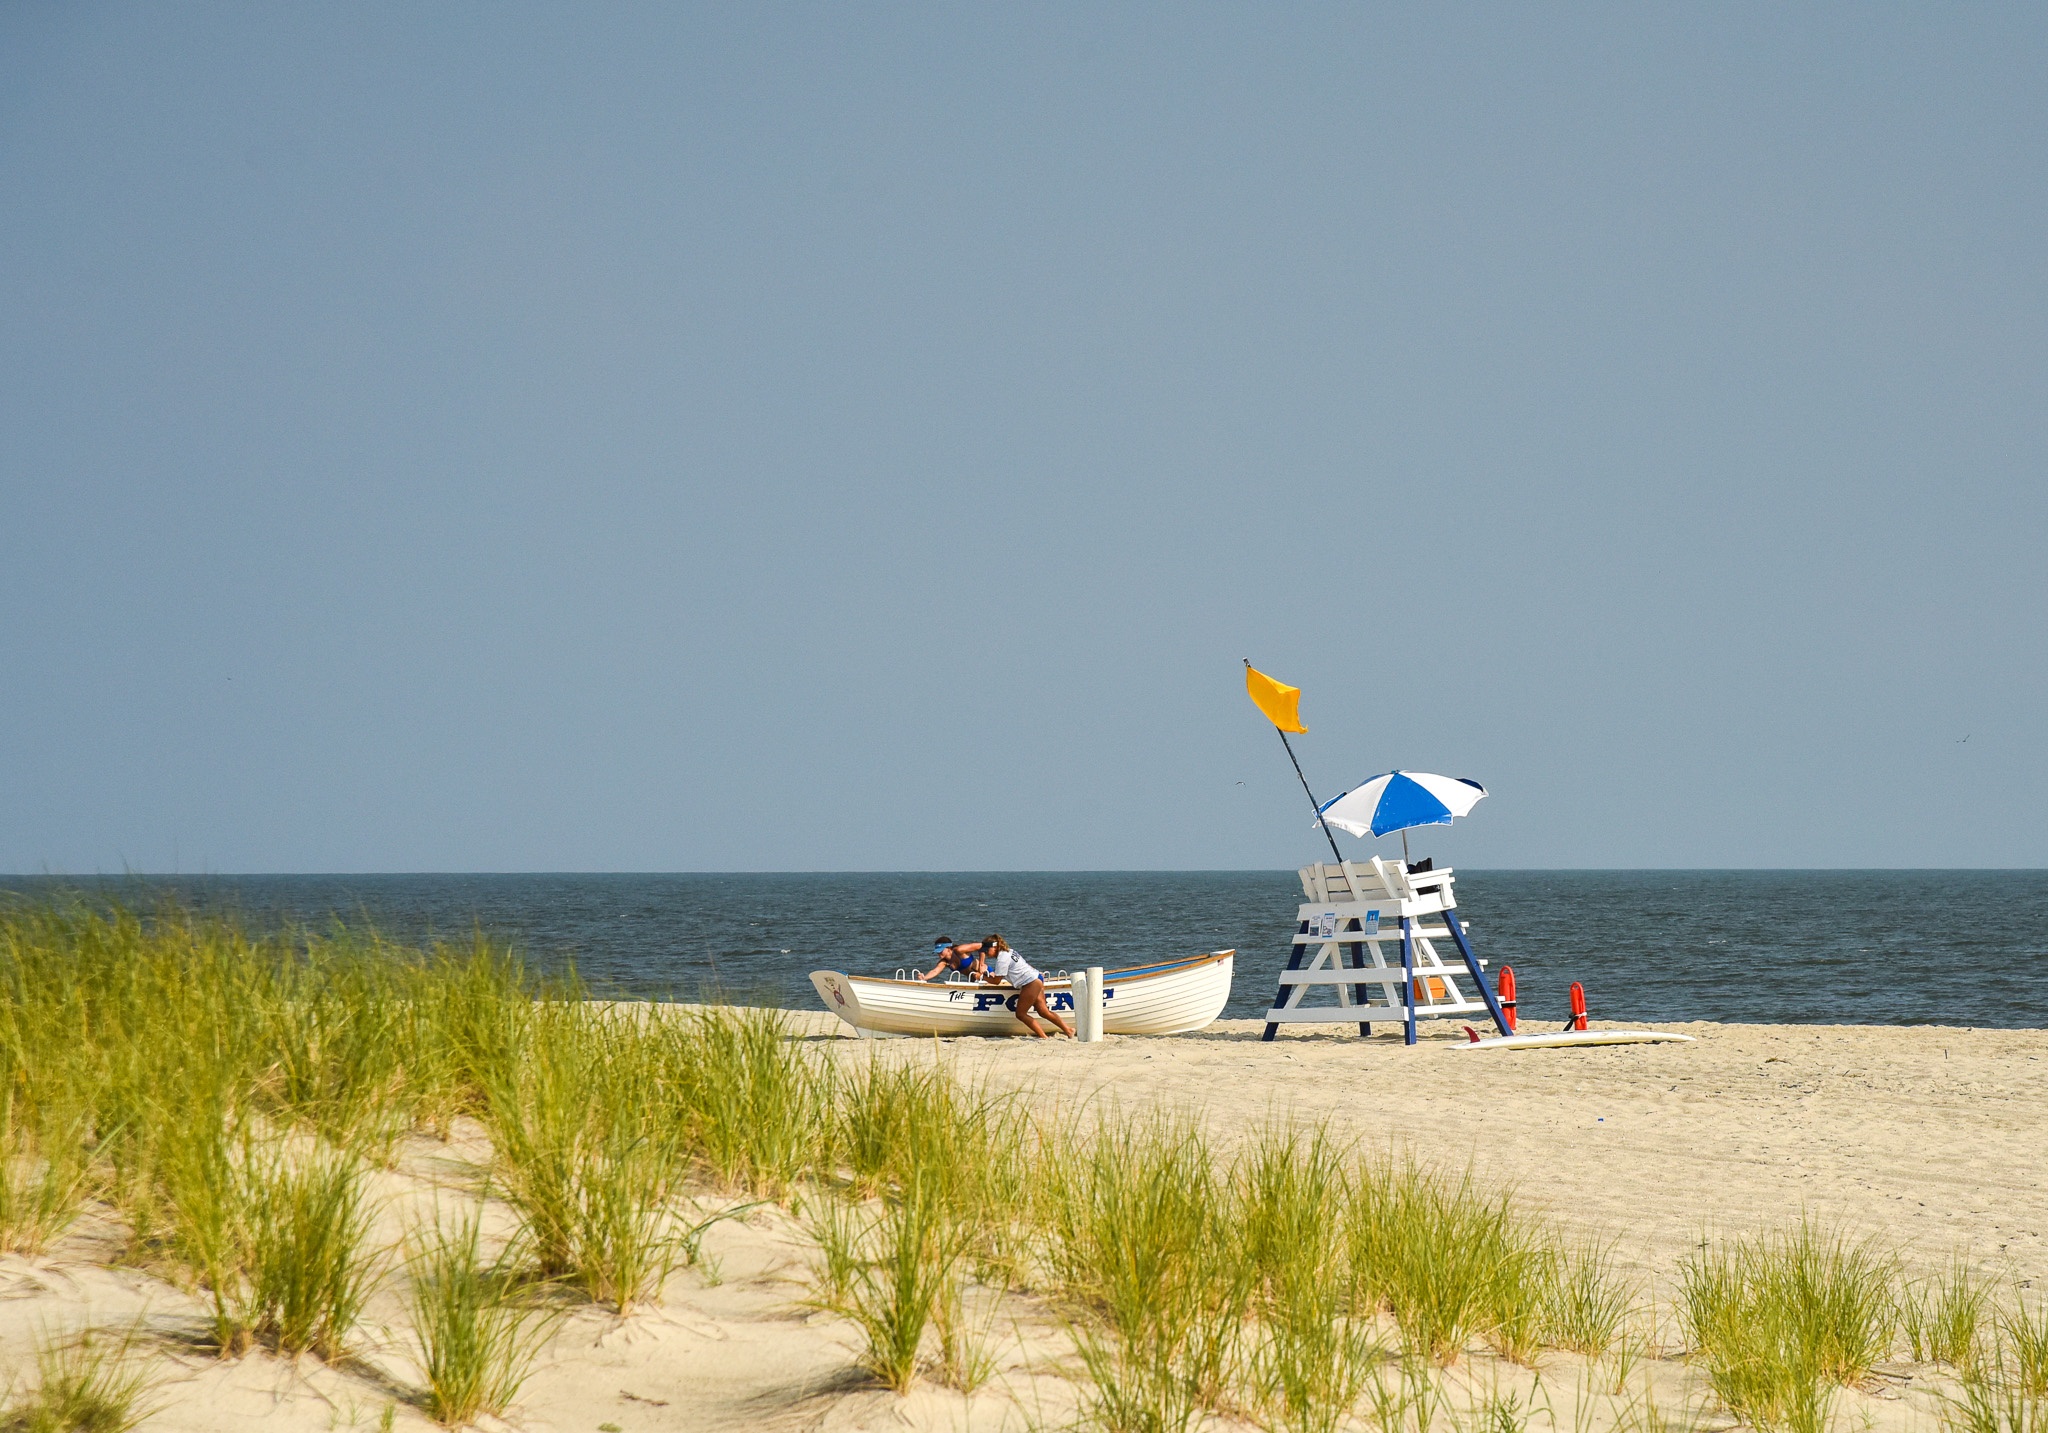 Lifeguards are Finished for the Day at Cape May Point beach.